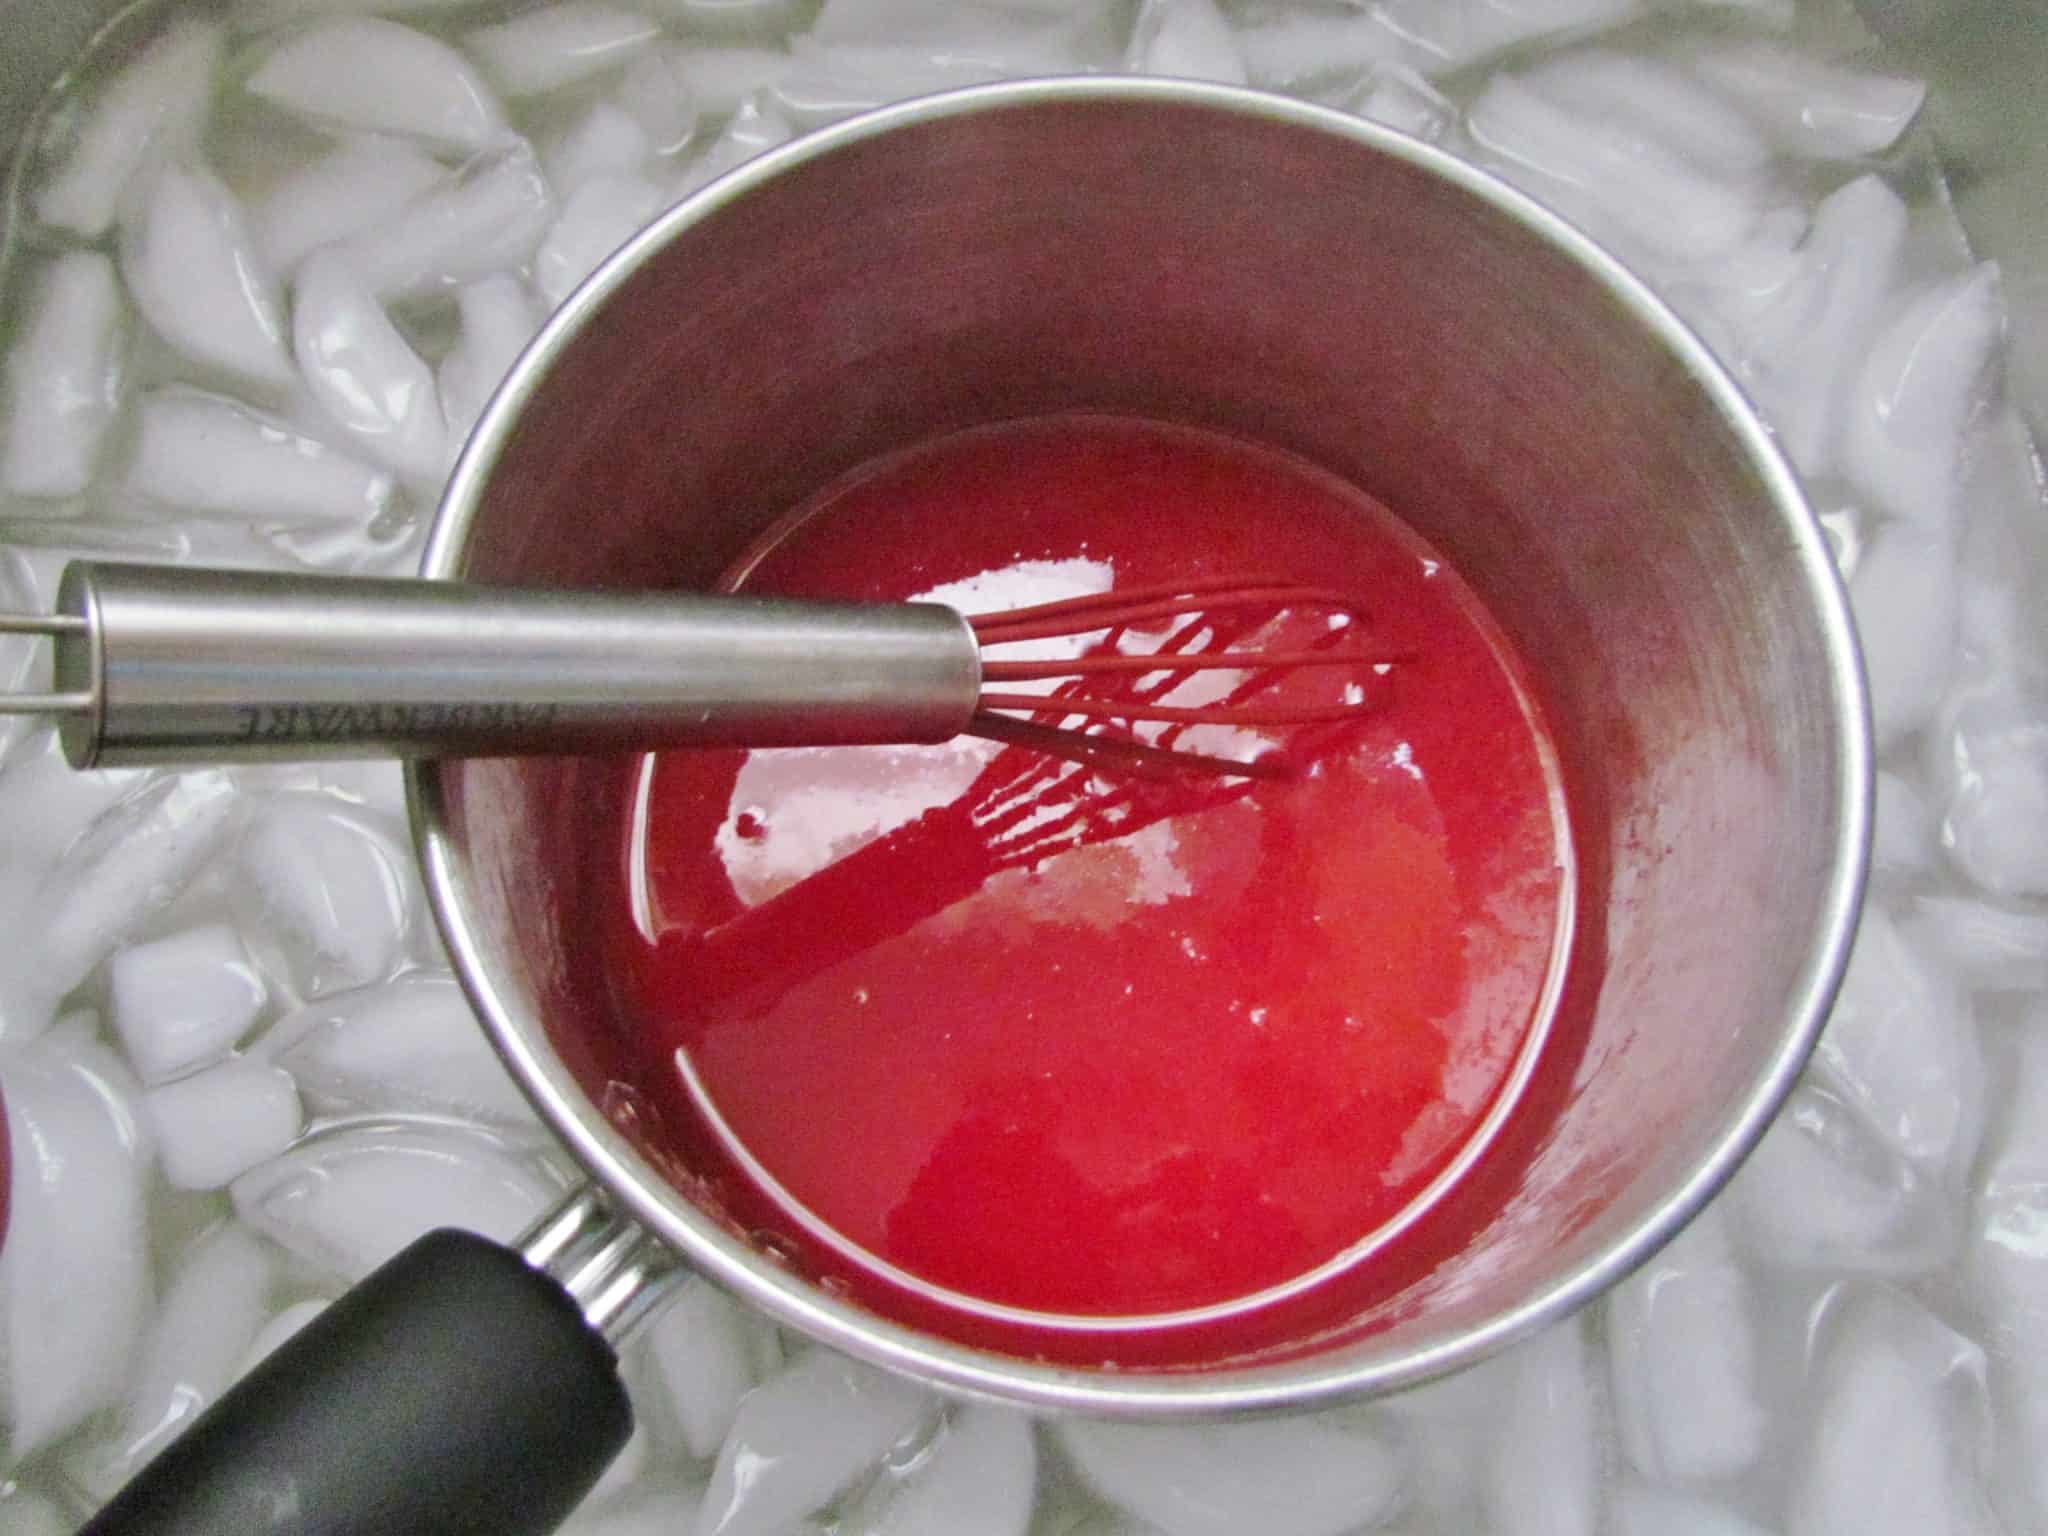 cooled gelatin mixture in a sauce pan shown in an ice water bath.